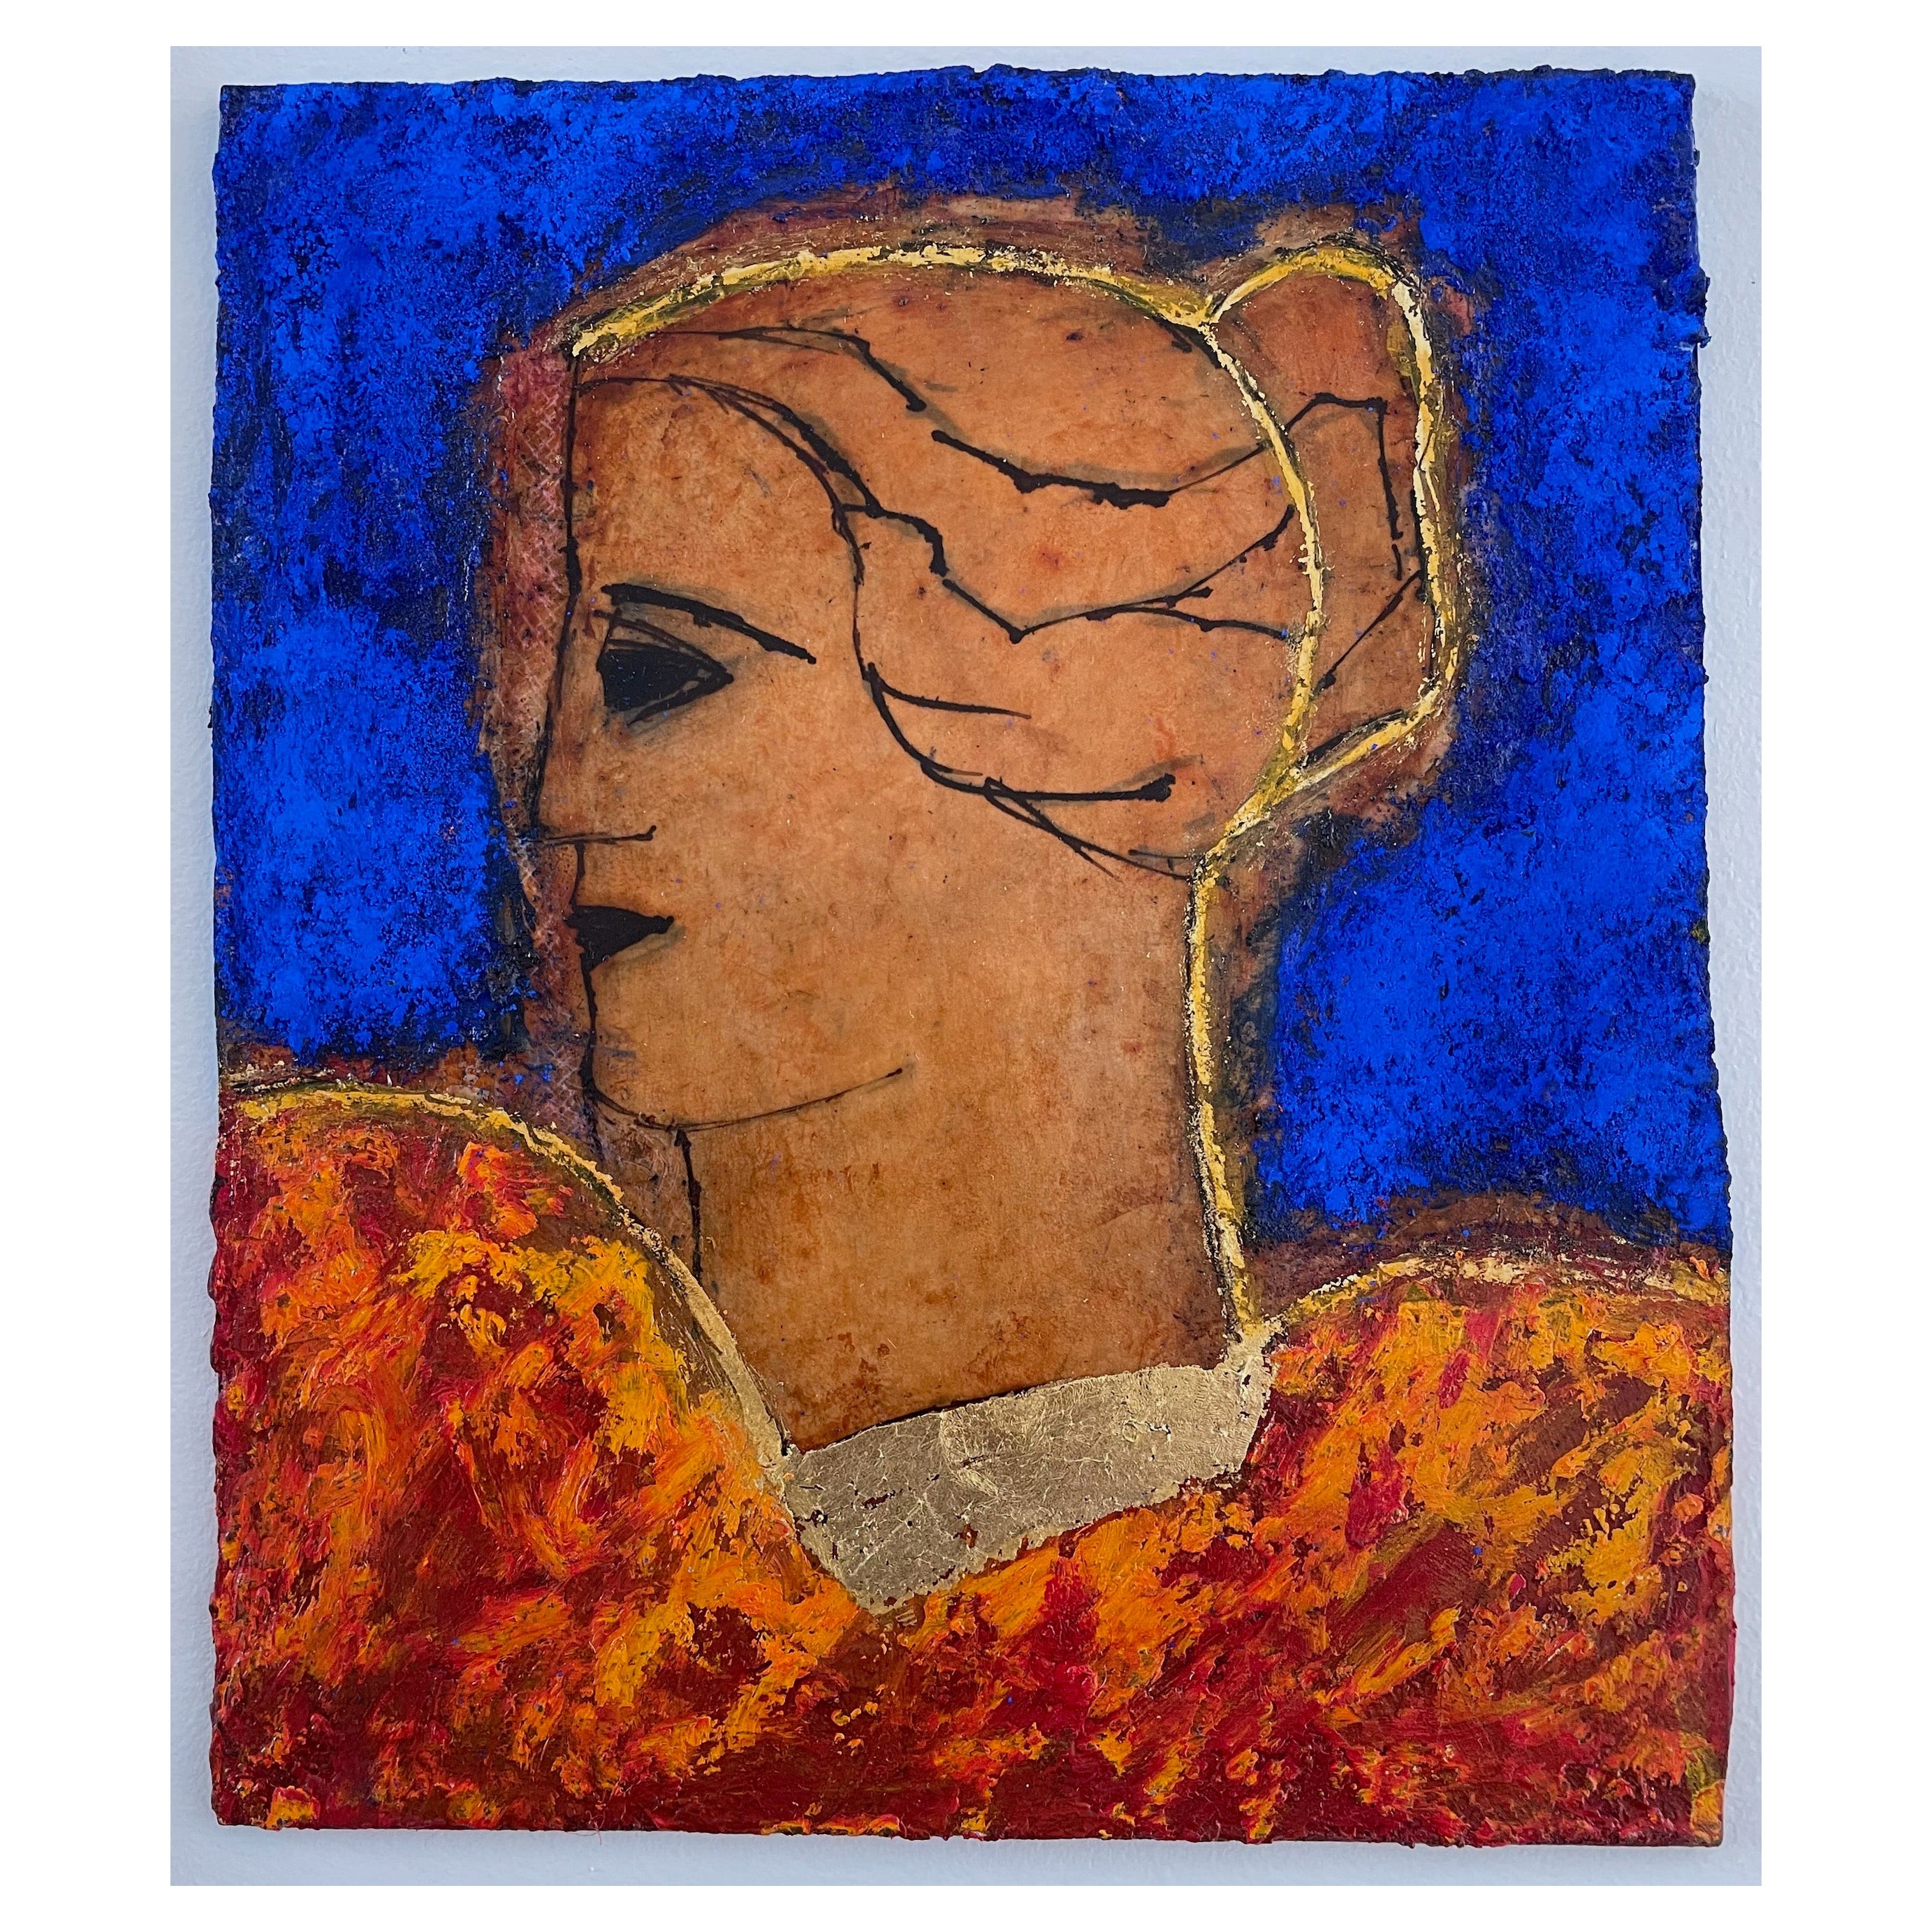 Classical Head, Contemporary Mixed Media Figurative Painting